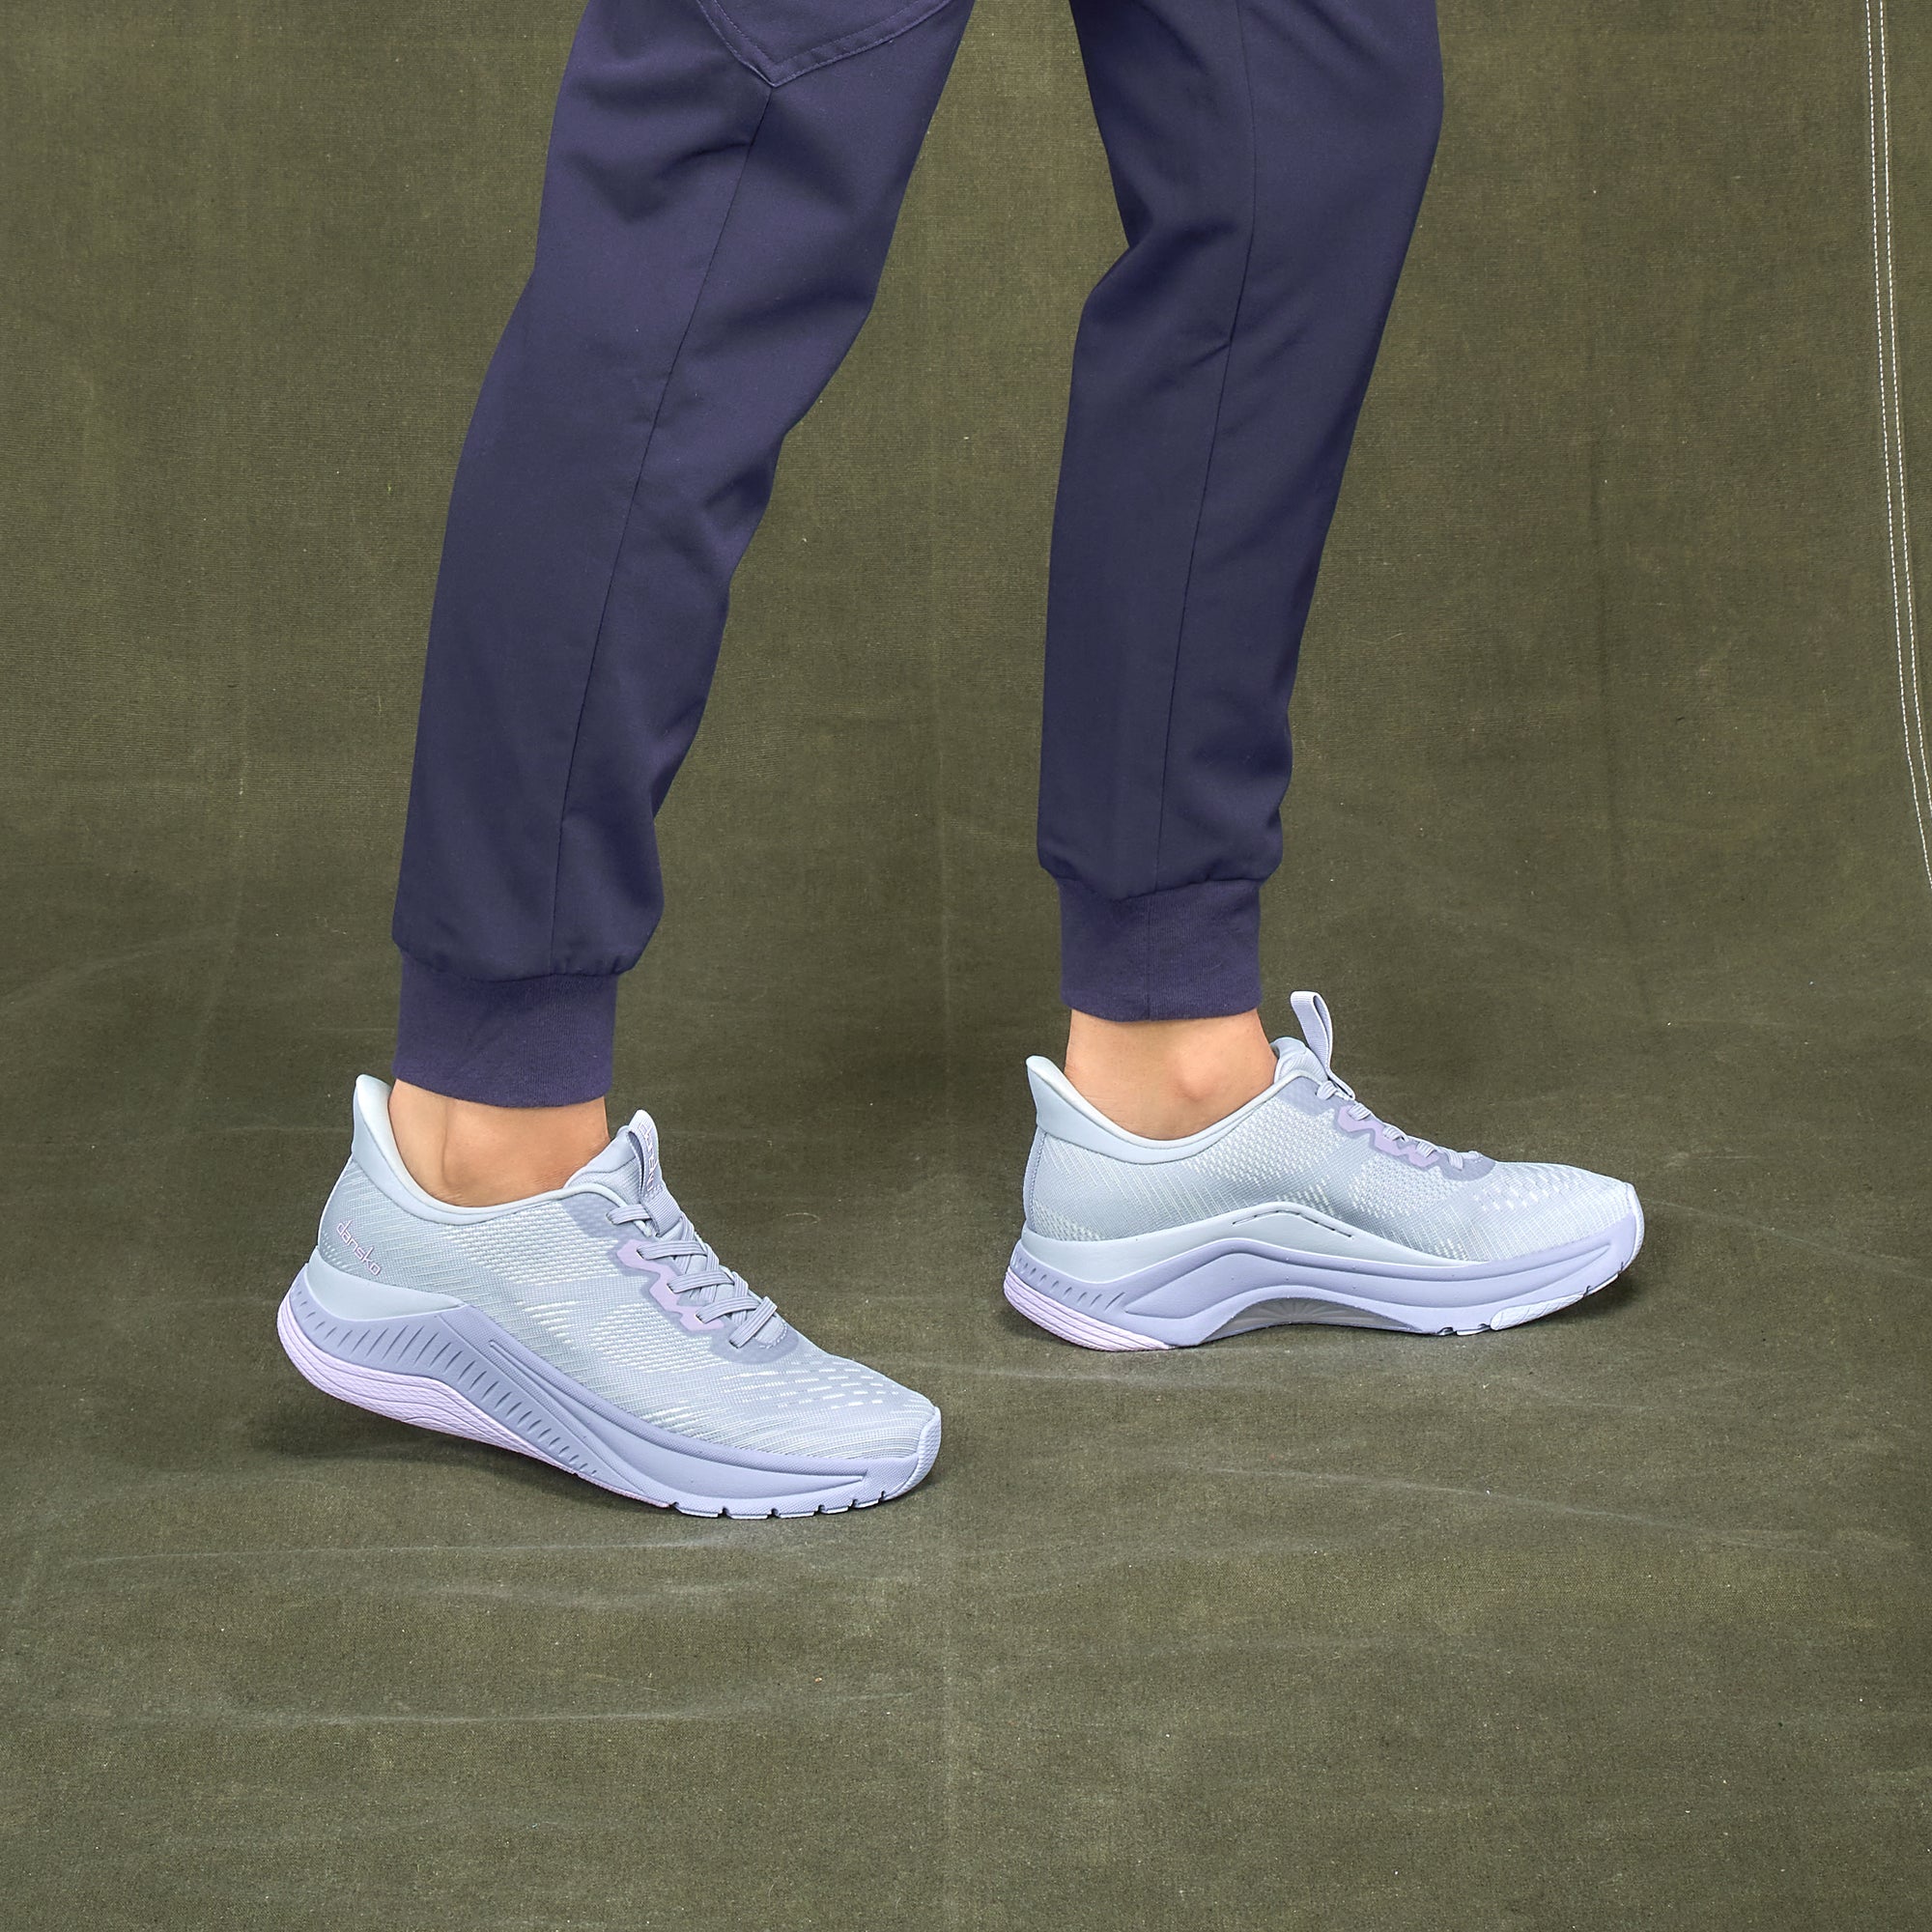 A closeup of lilac walking sneakers worn with scrubs.